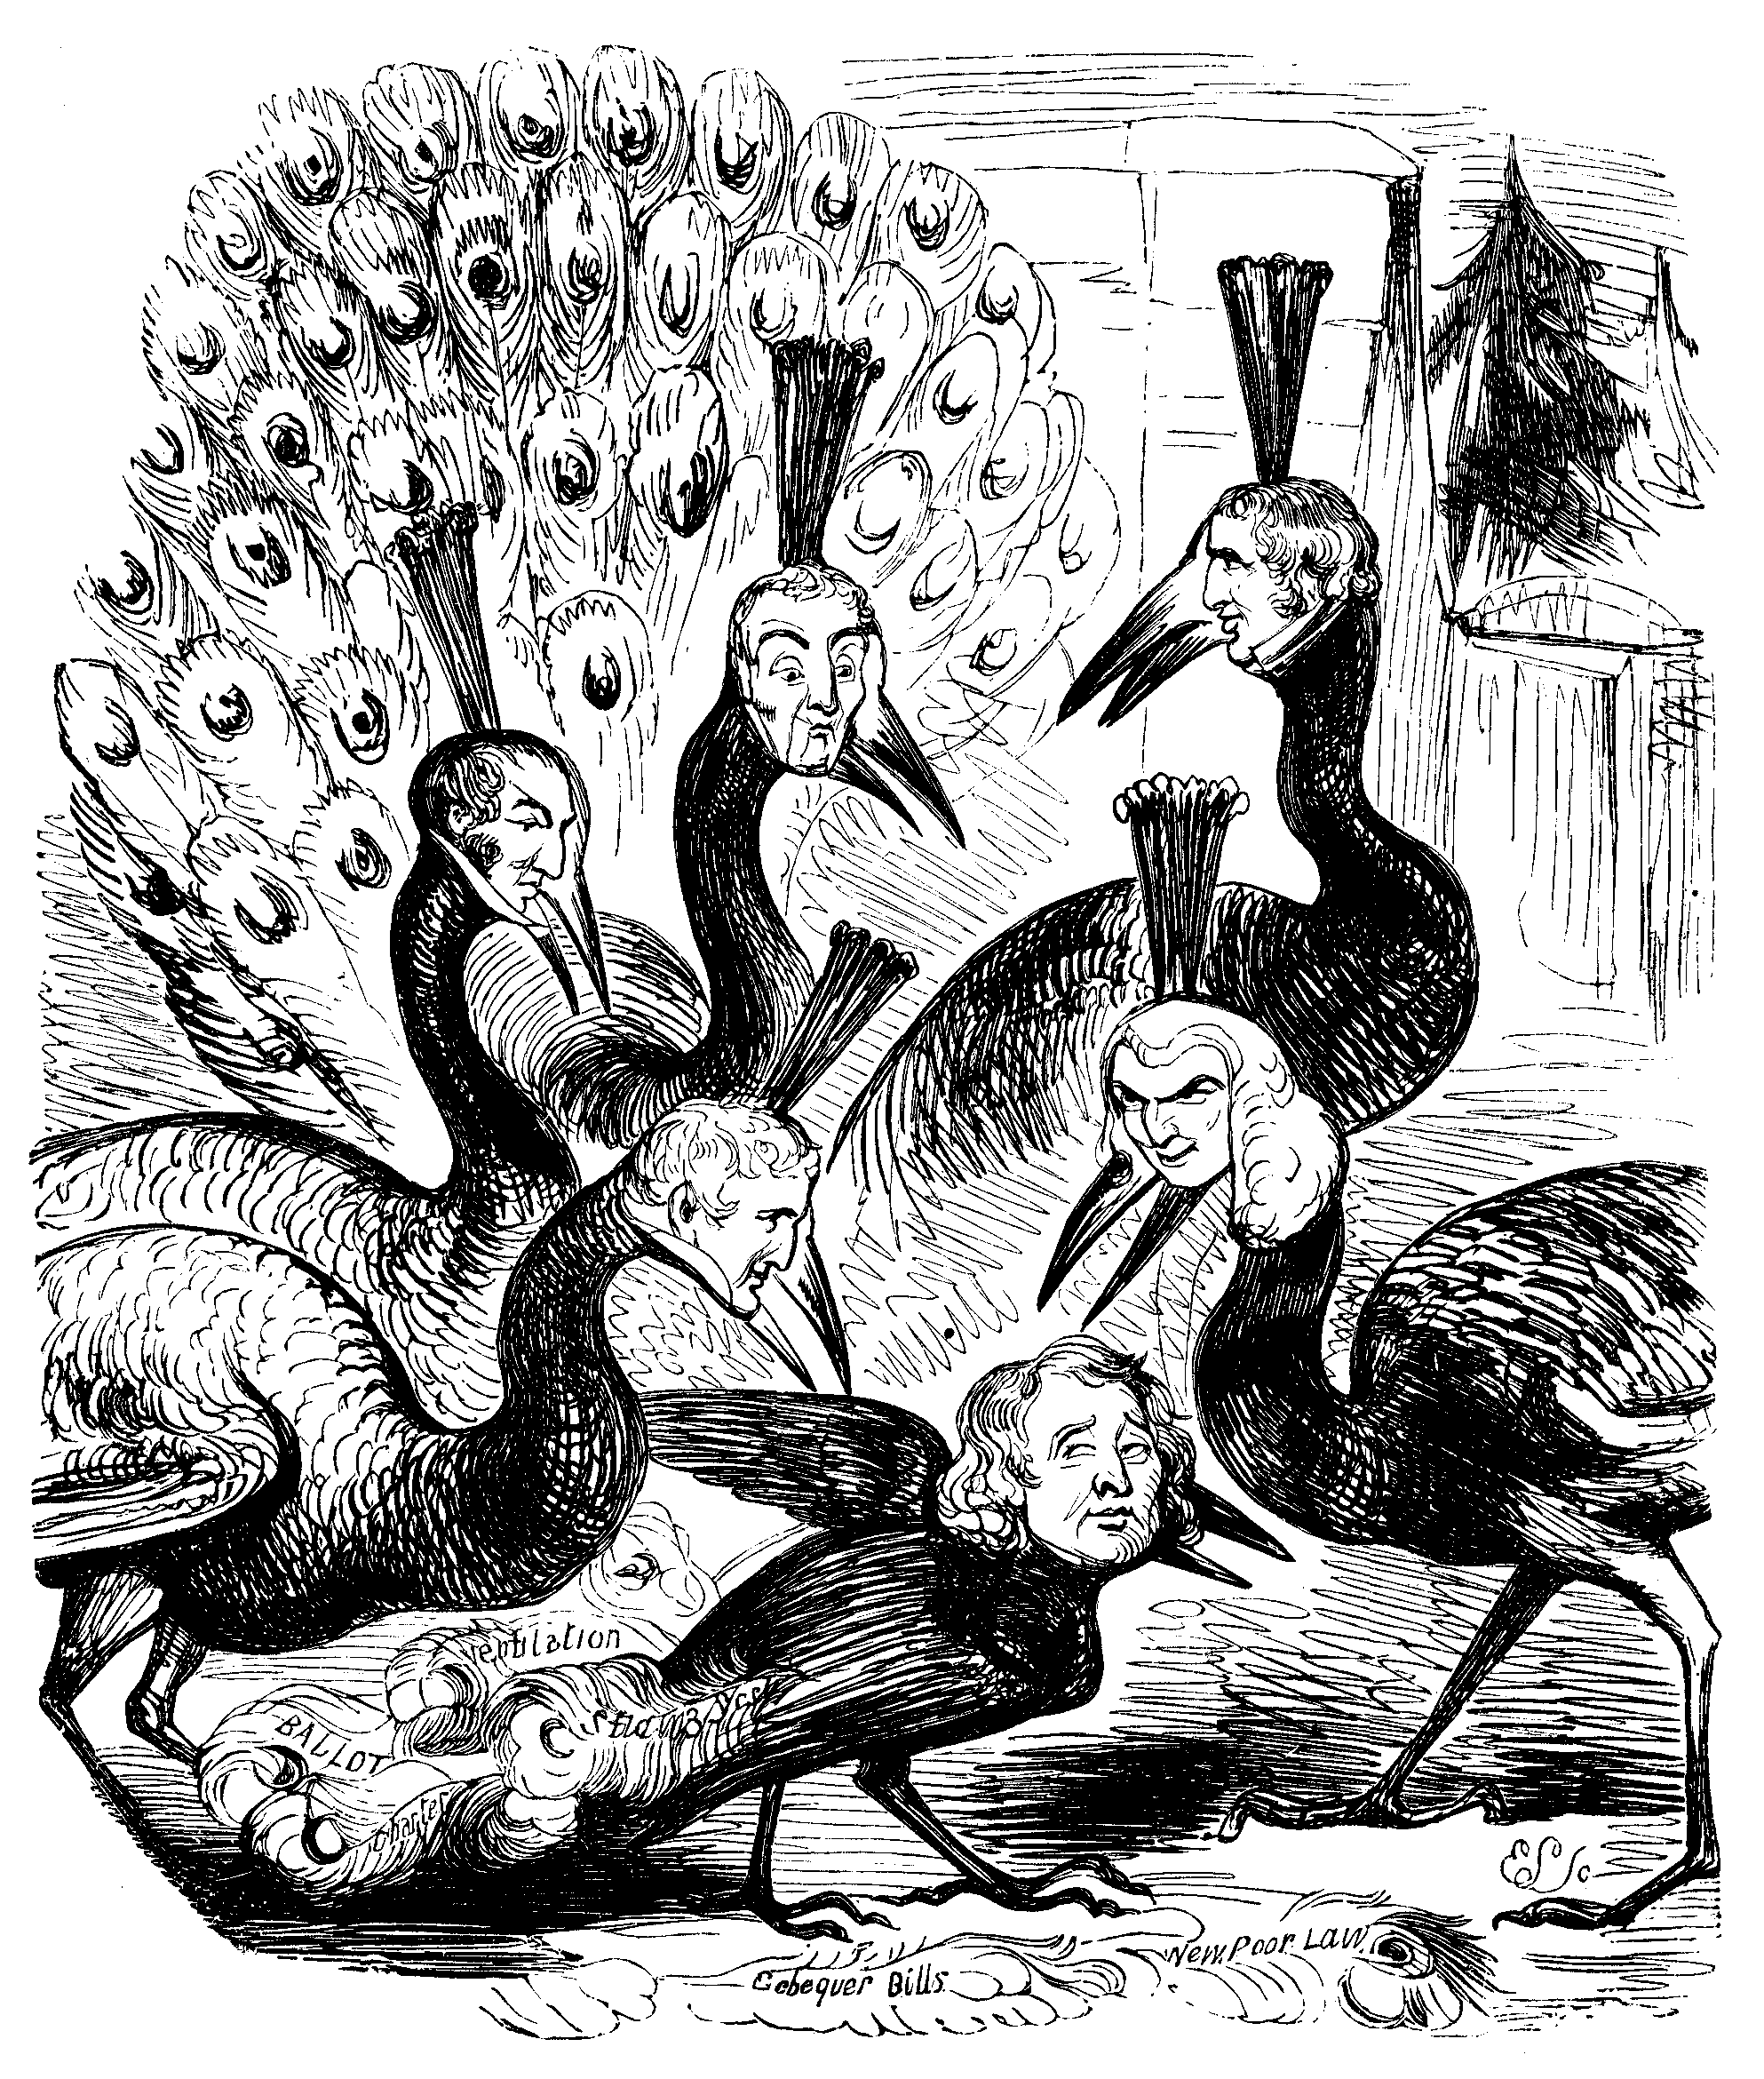 A group of peacocks with men's faces look down on a blackbird with a man's face.